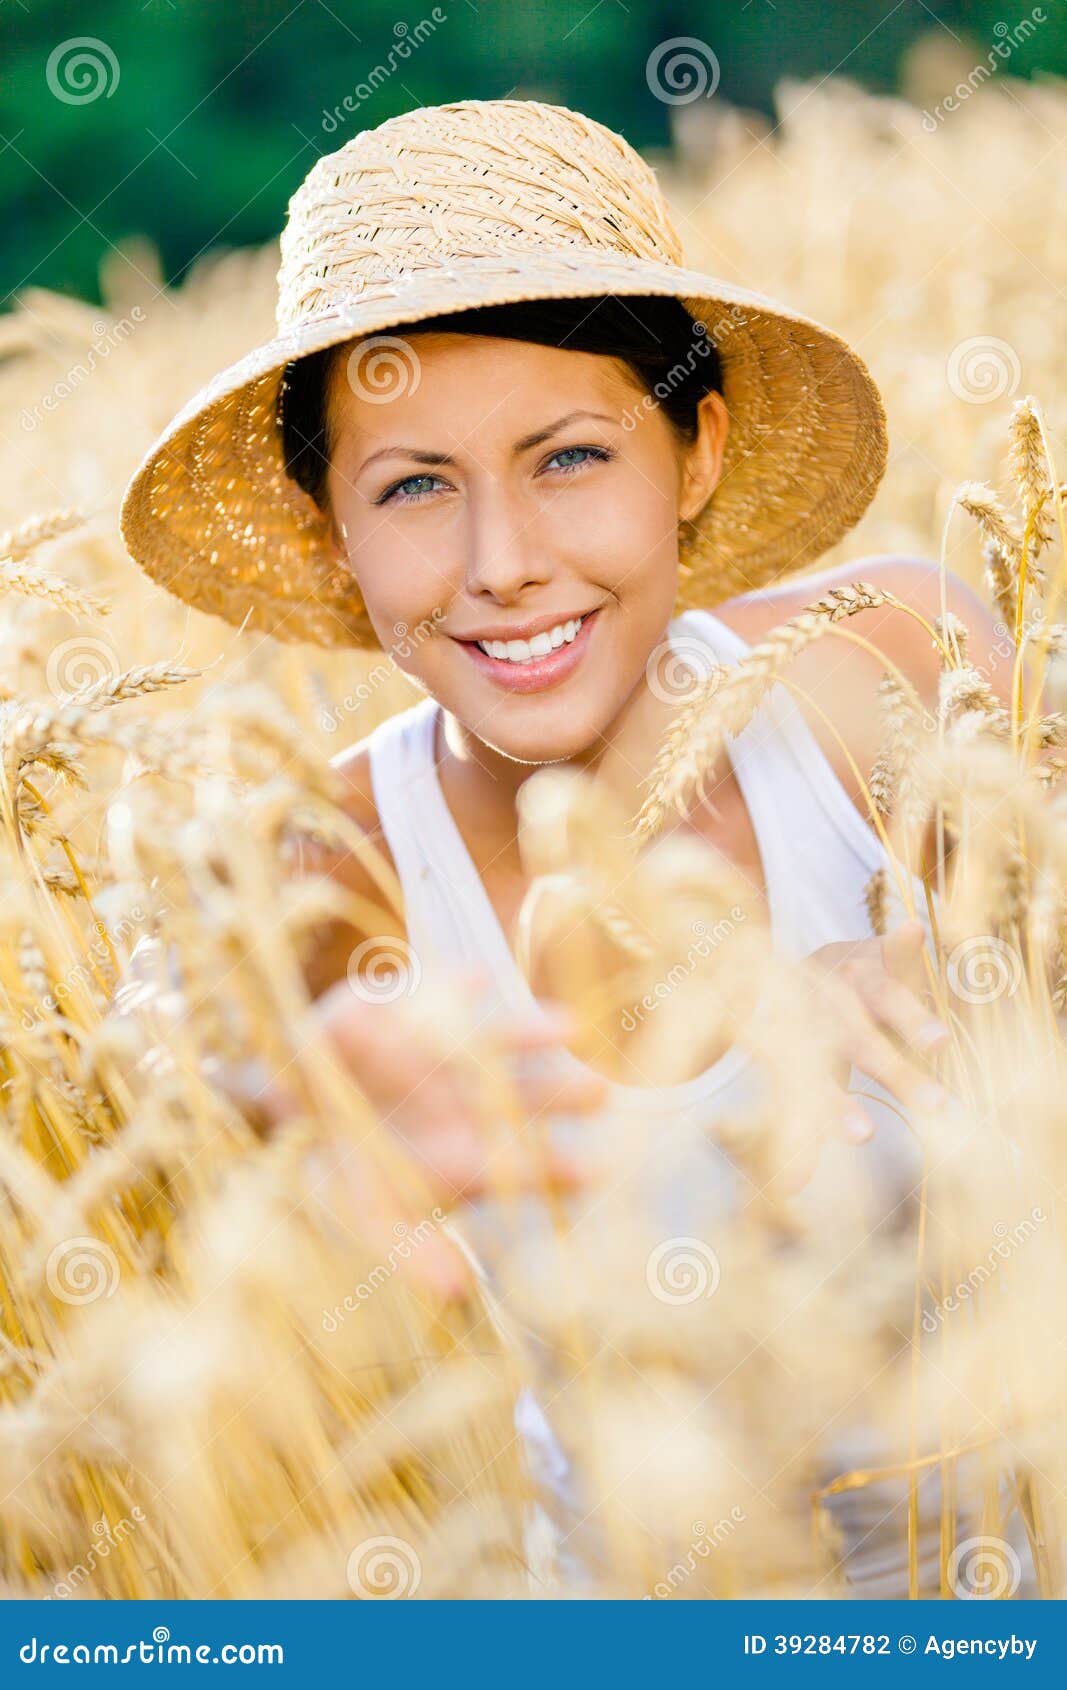 Girl Wearing Straw Hat is in Rye Field Stock Photo - Image of happiness ...